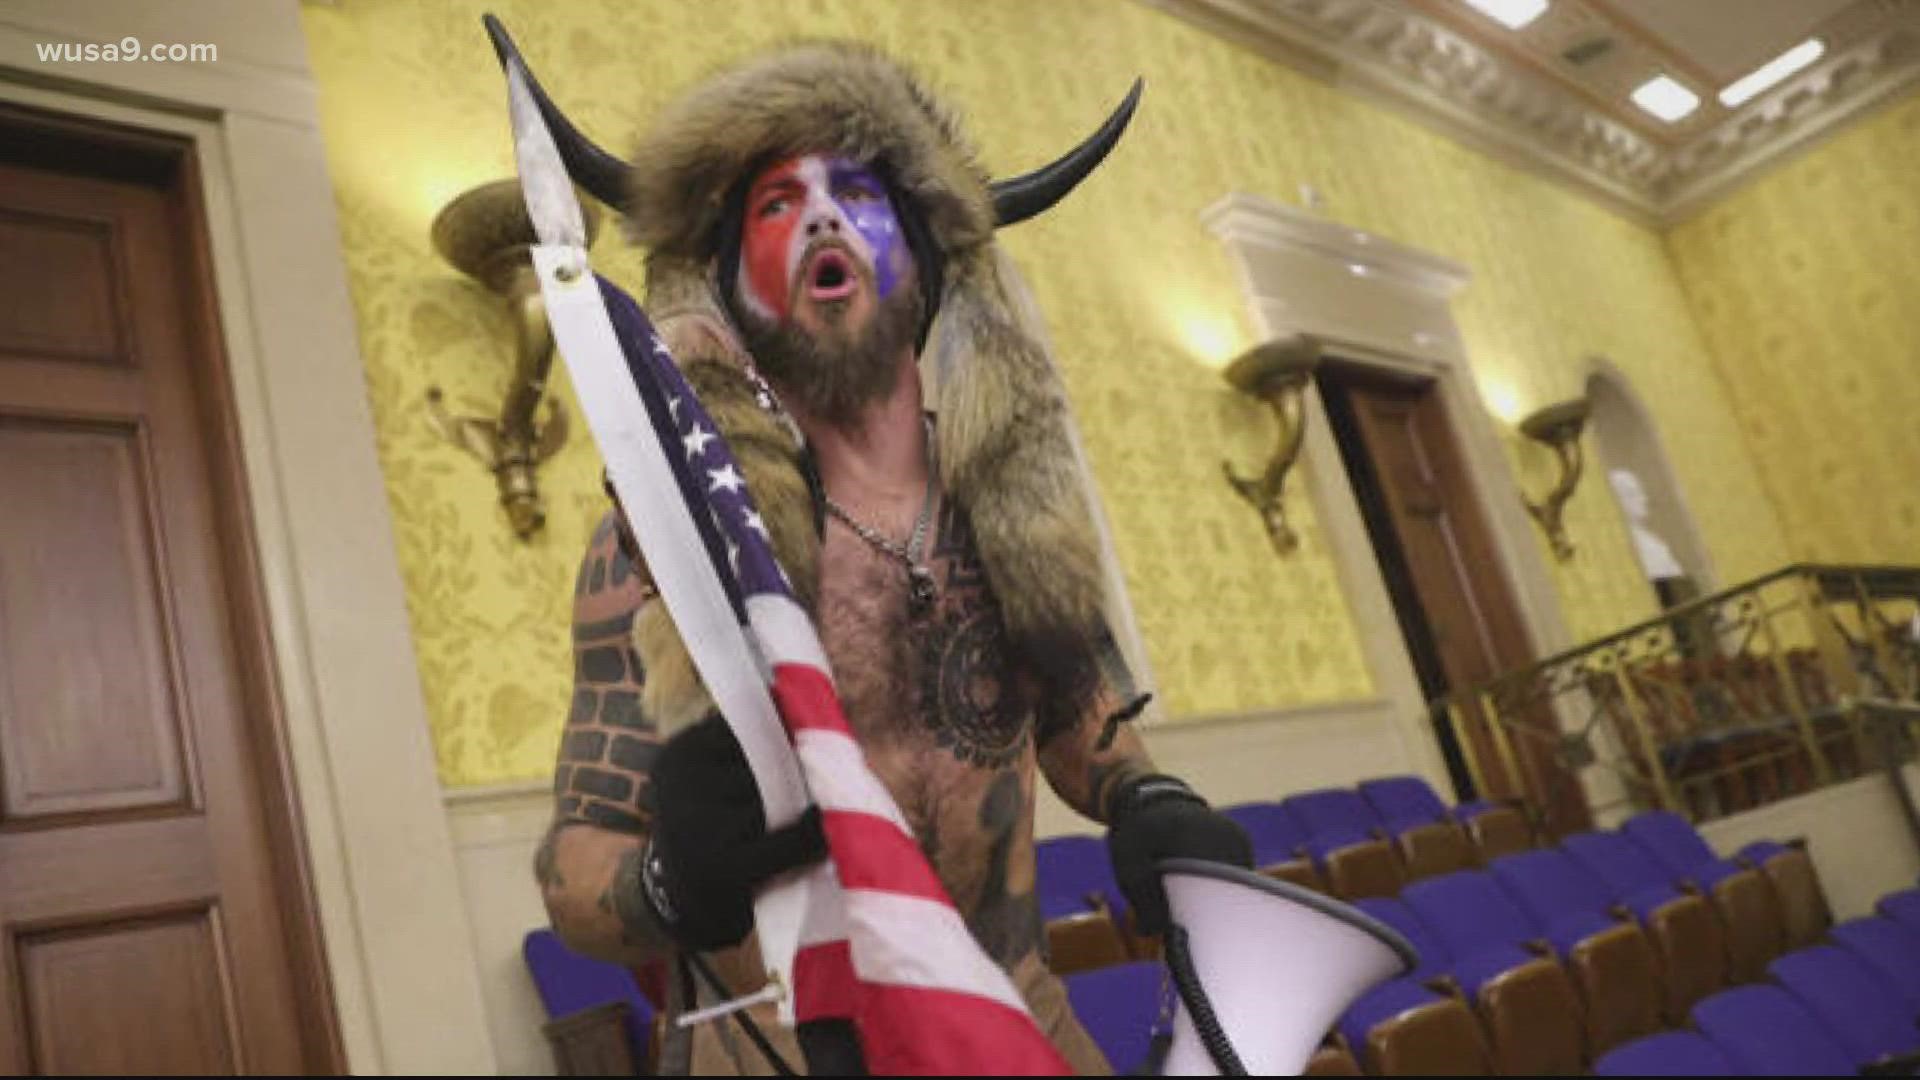 The Arizona man who wore a horned cap and carried a spear into the U.S. Capitol Building on January 6 will spend years behind bars for obstruction.